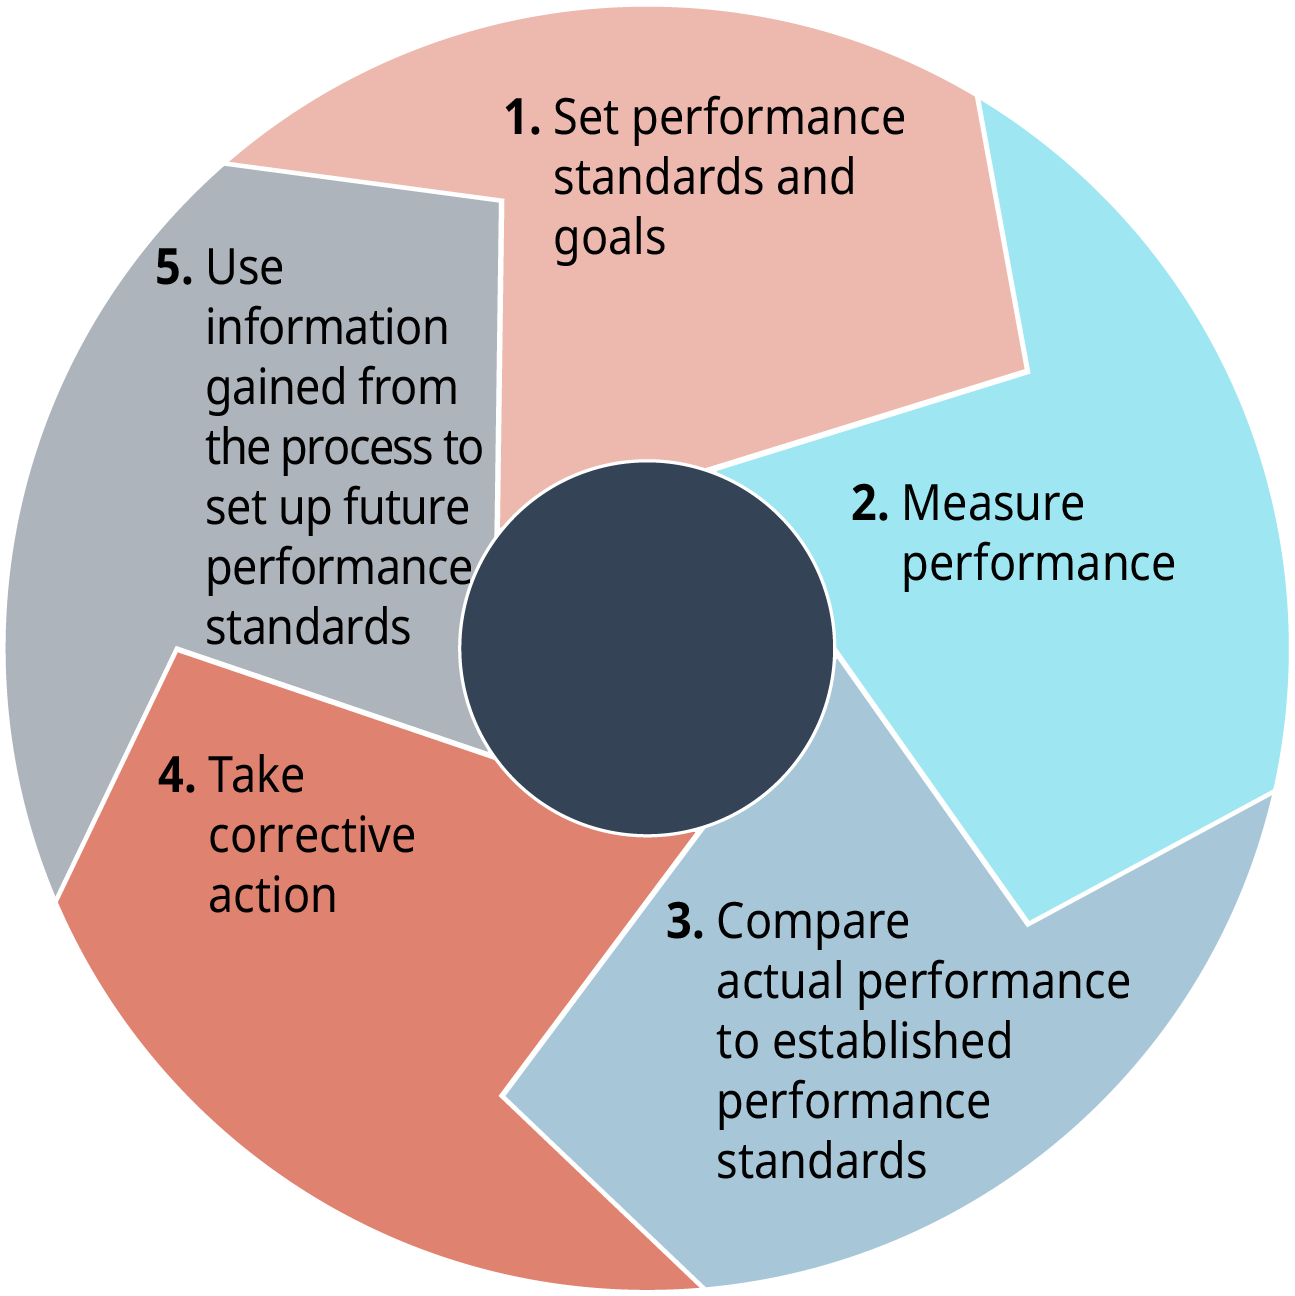 Each stage flows into the next. Stage 1 says, set performance standards and goals. Stage 2 says, measure performance. Stage 3 says, compare actual performance to established performance standards. Stage 4 says, take corrective action. Stage 5 says, use information gained from the process to set up future performance standards.